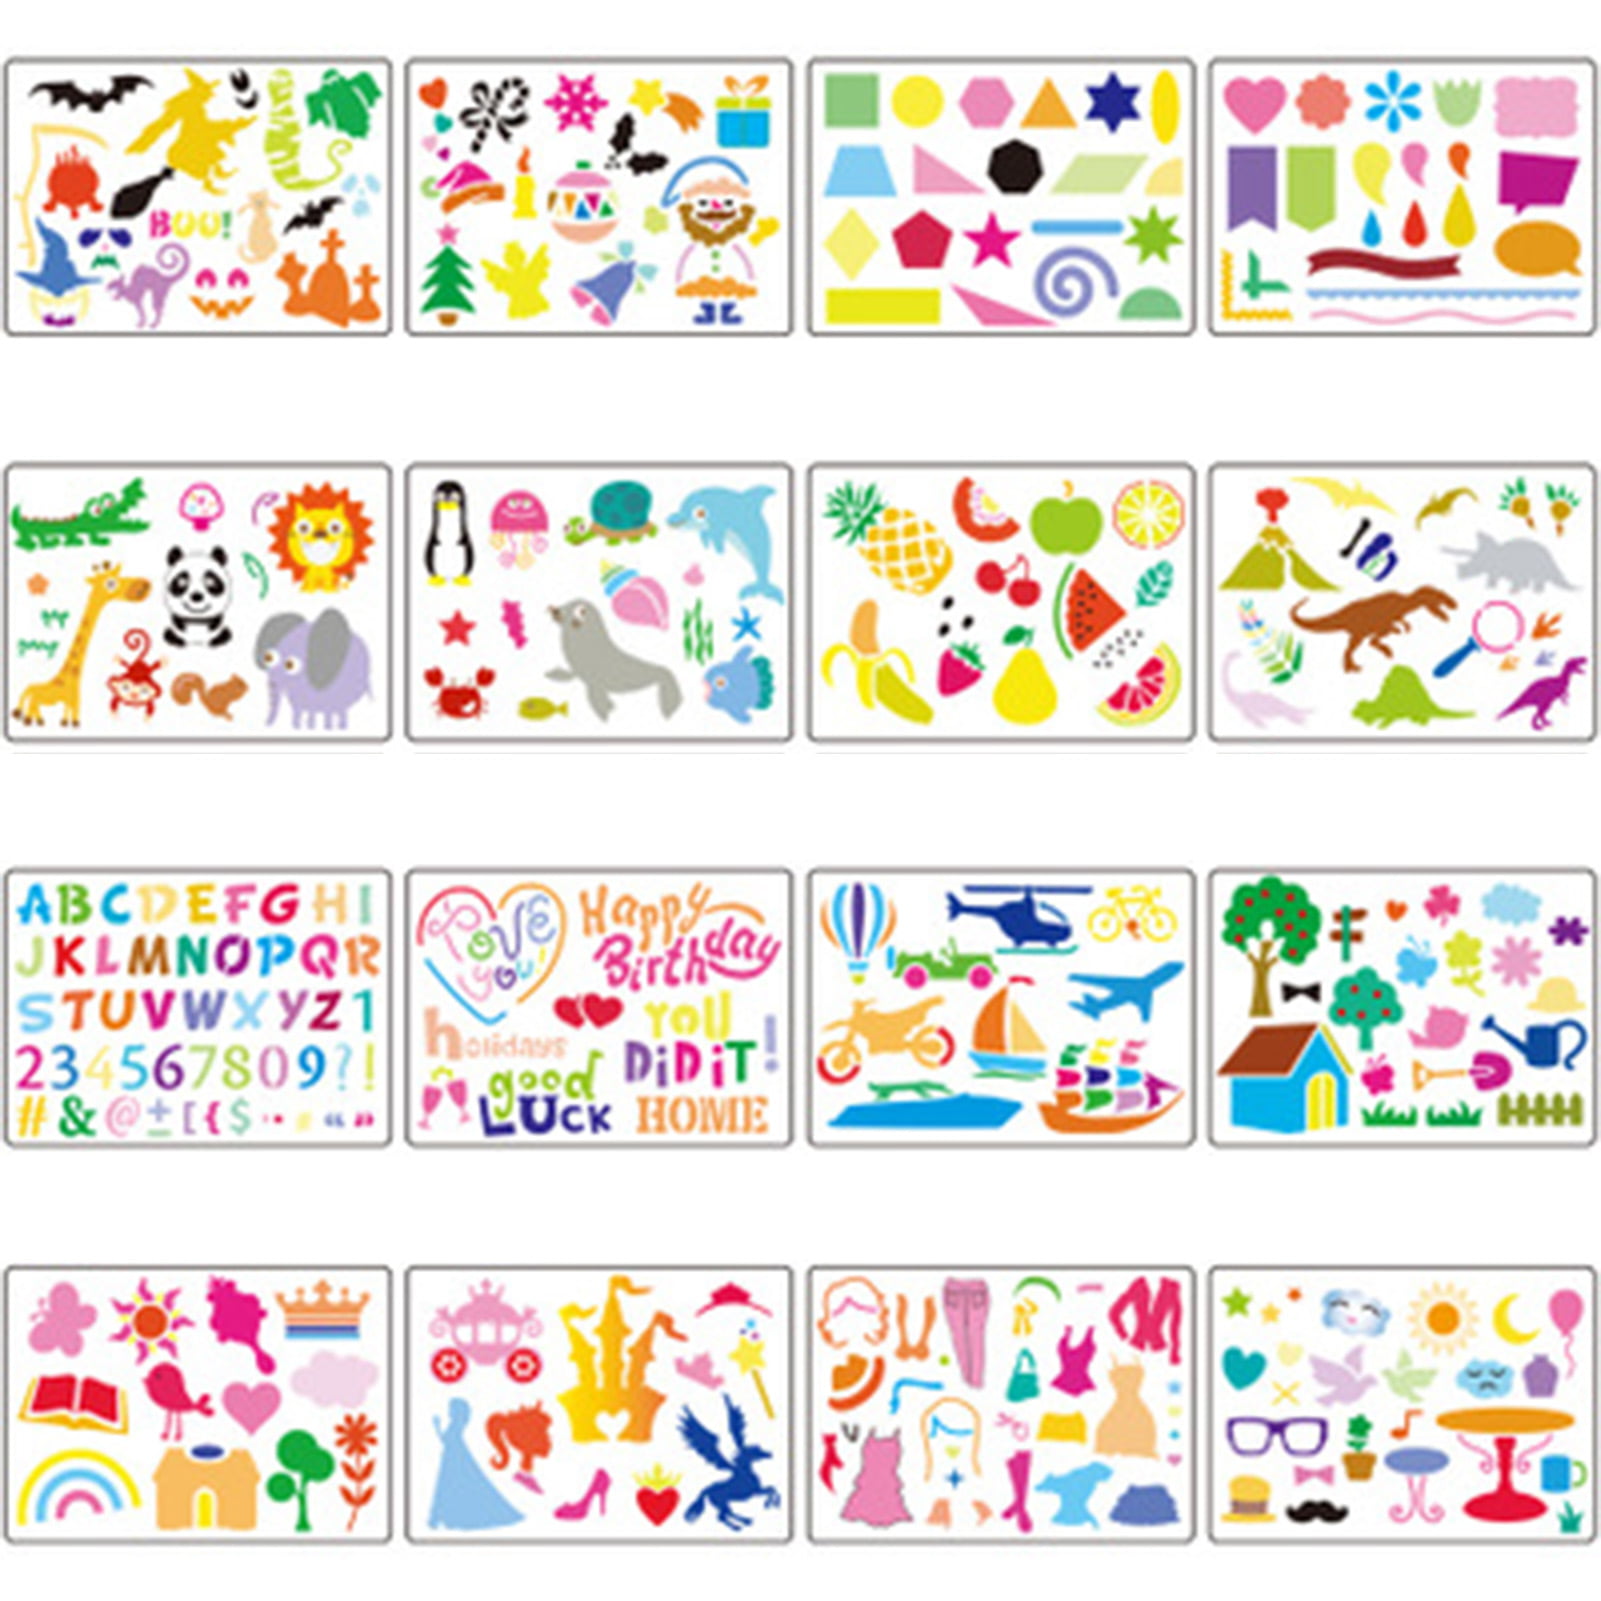 21 Pcs Drawing Painting Stencils Set Stocking Stuffers for Kids, Plastic  Painting Template Over 300 Different Patterns with 1 Pcs Painting Brush for